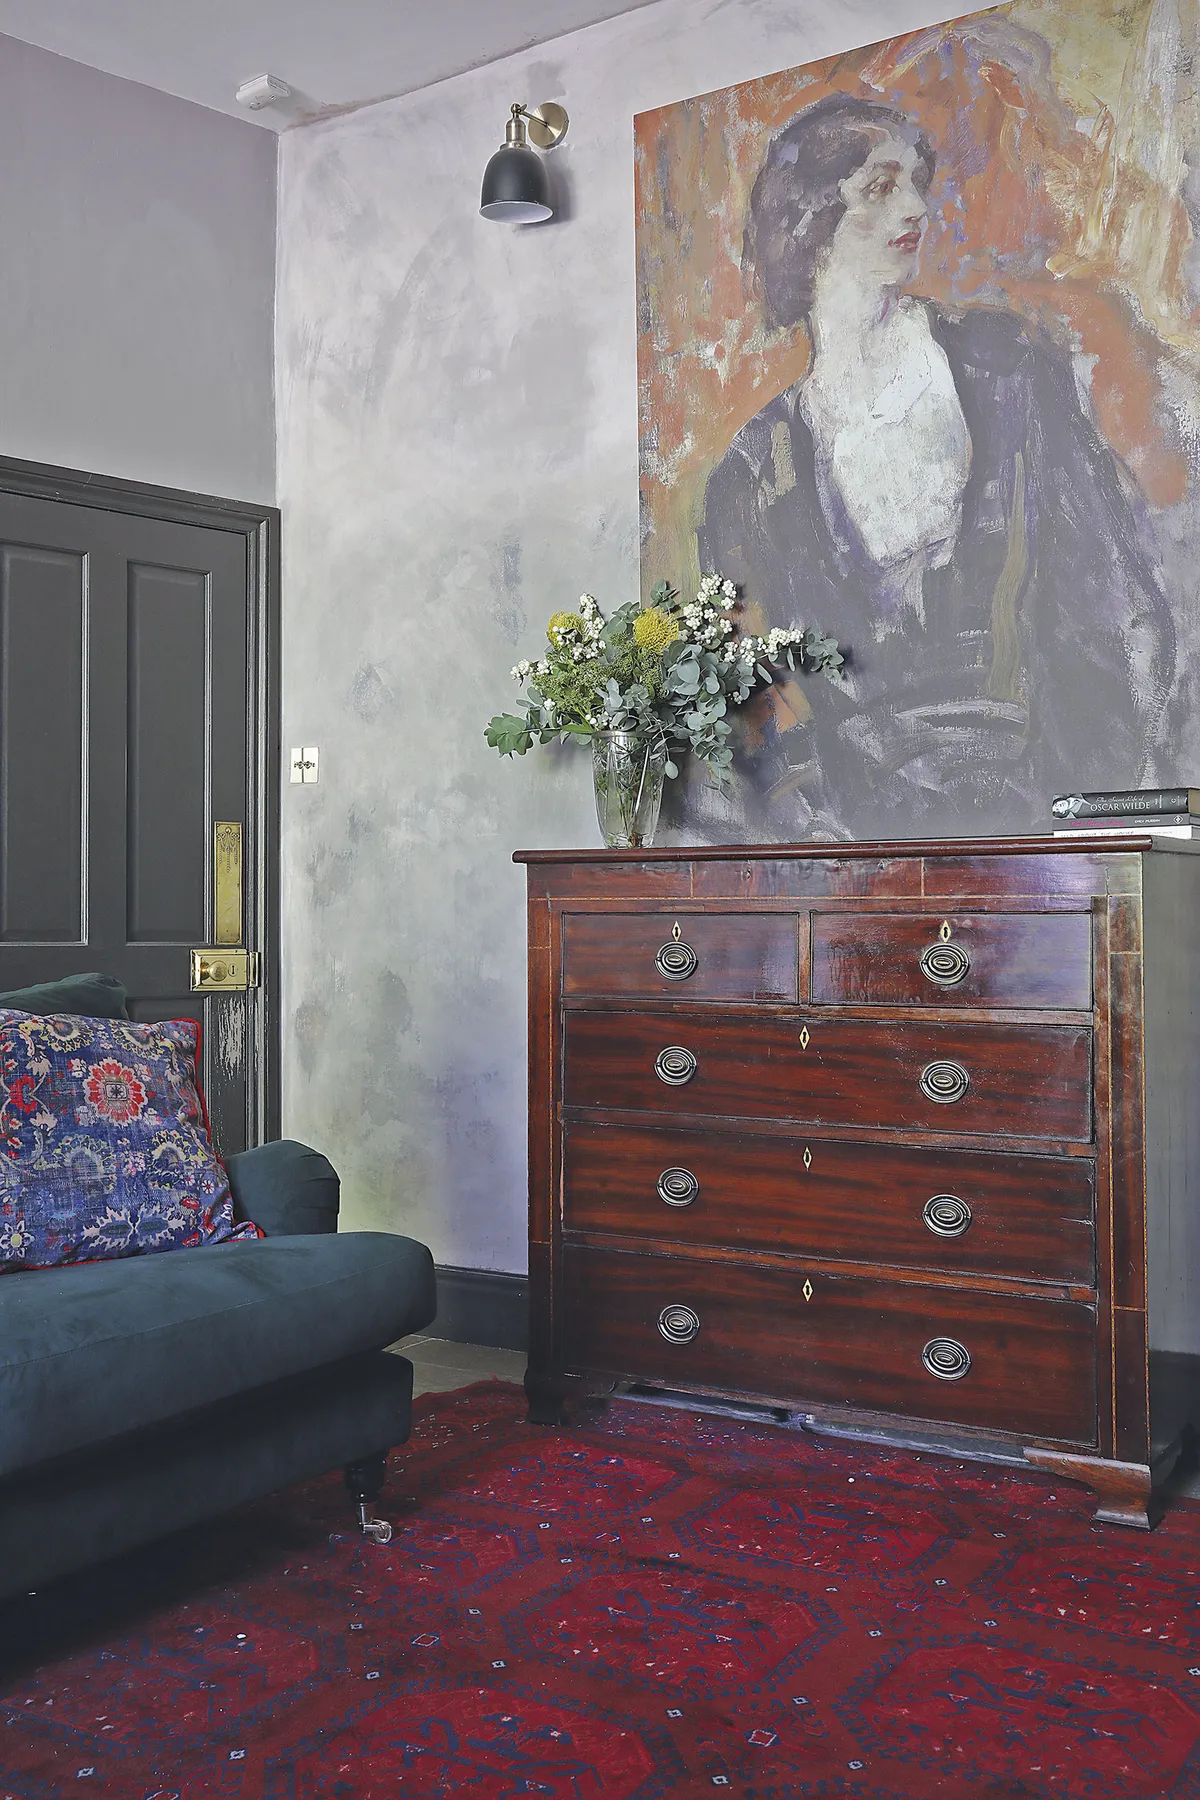 ‘My husband, Trevor, gave this wall a broken plaster effect using different paints. I knew I wanted a strong bold piece here and found this canvas at Surface View. It’s called Lillah McCarthy by Ambrose McEvoy from their National Portrait Gallery collection. The chest of drawers was inherited from Trevor’s mum and works well with the antique Persian rug’